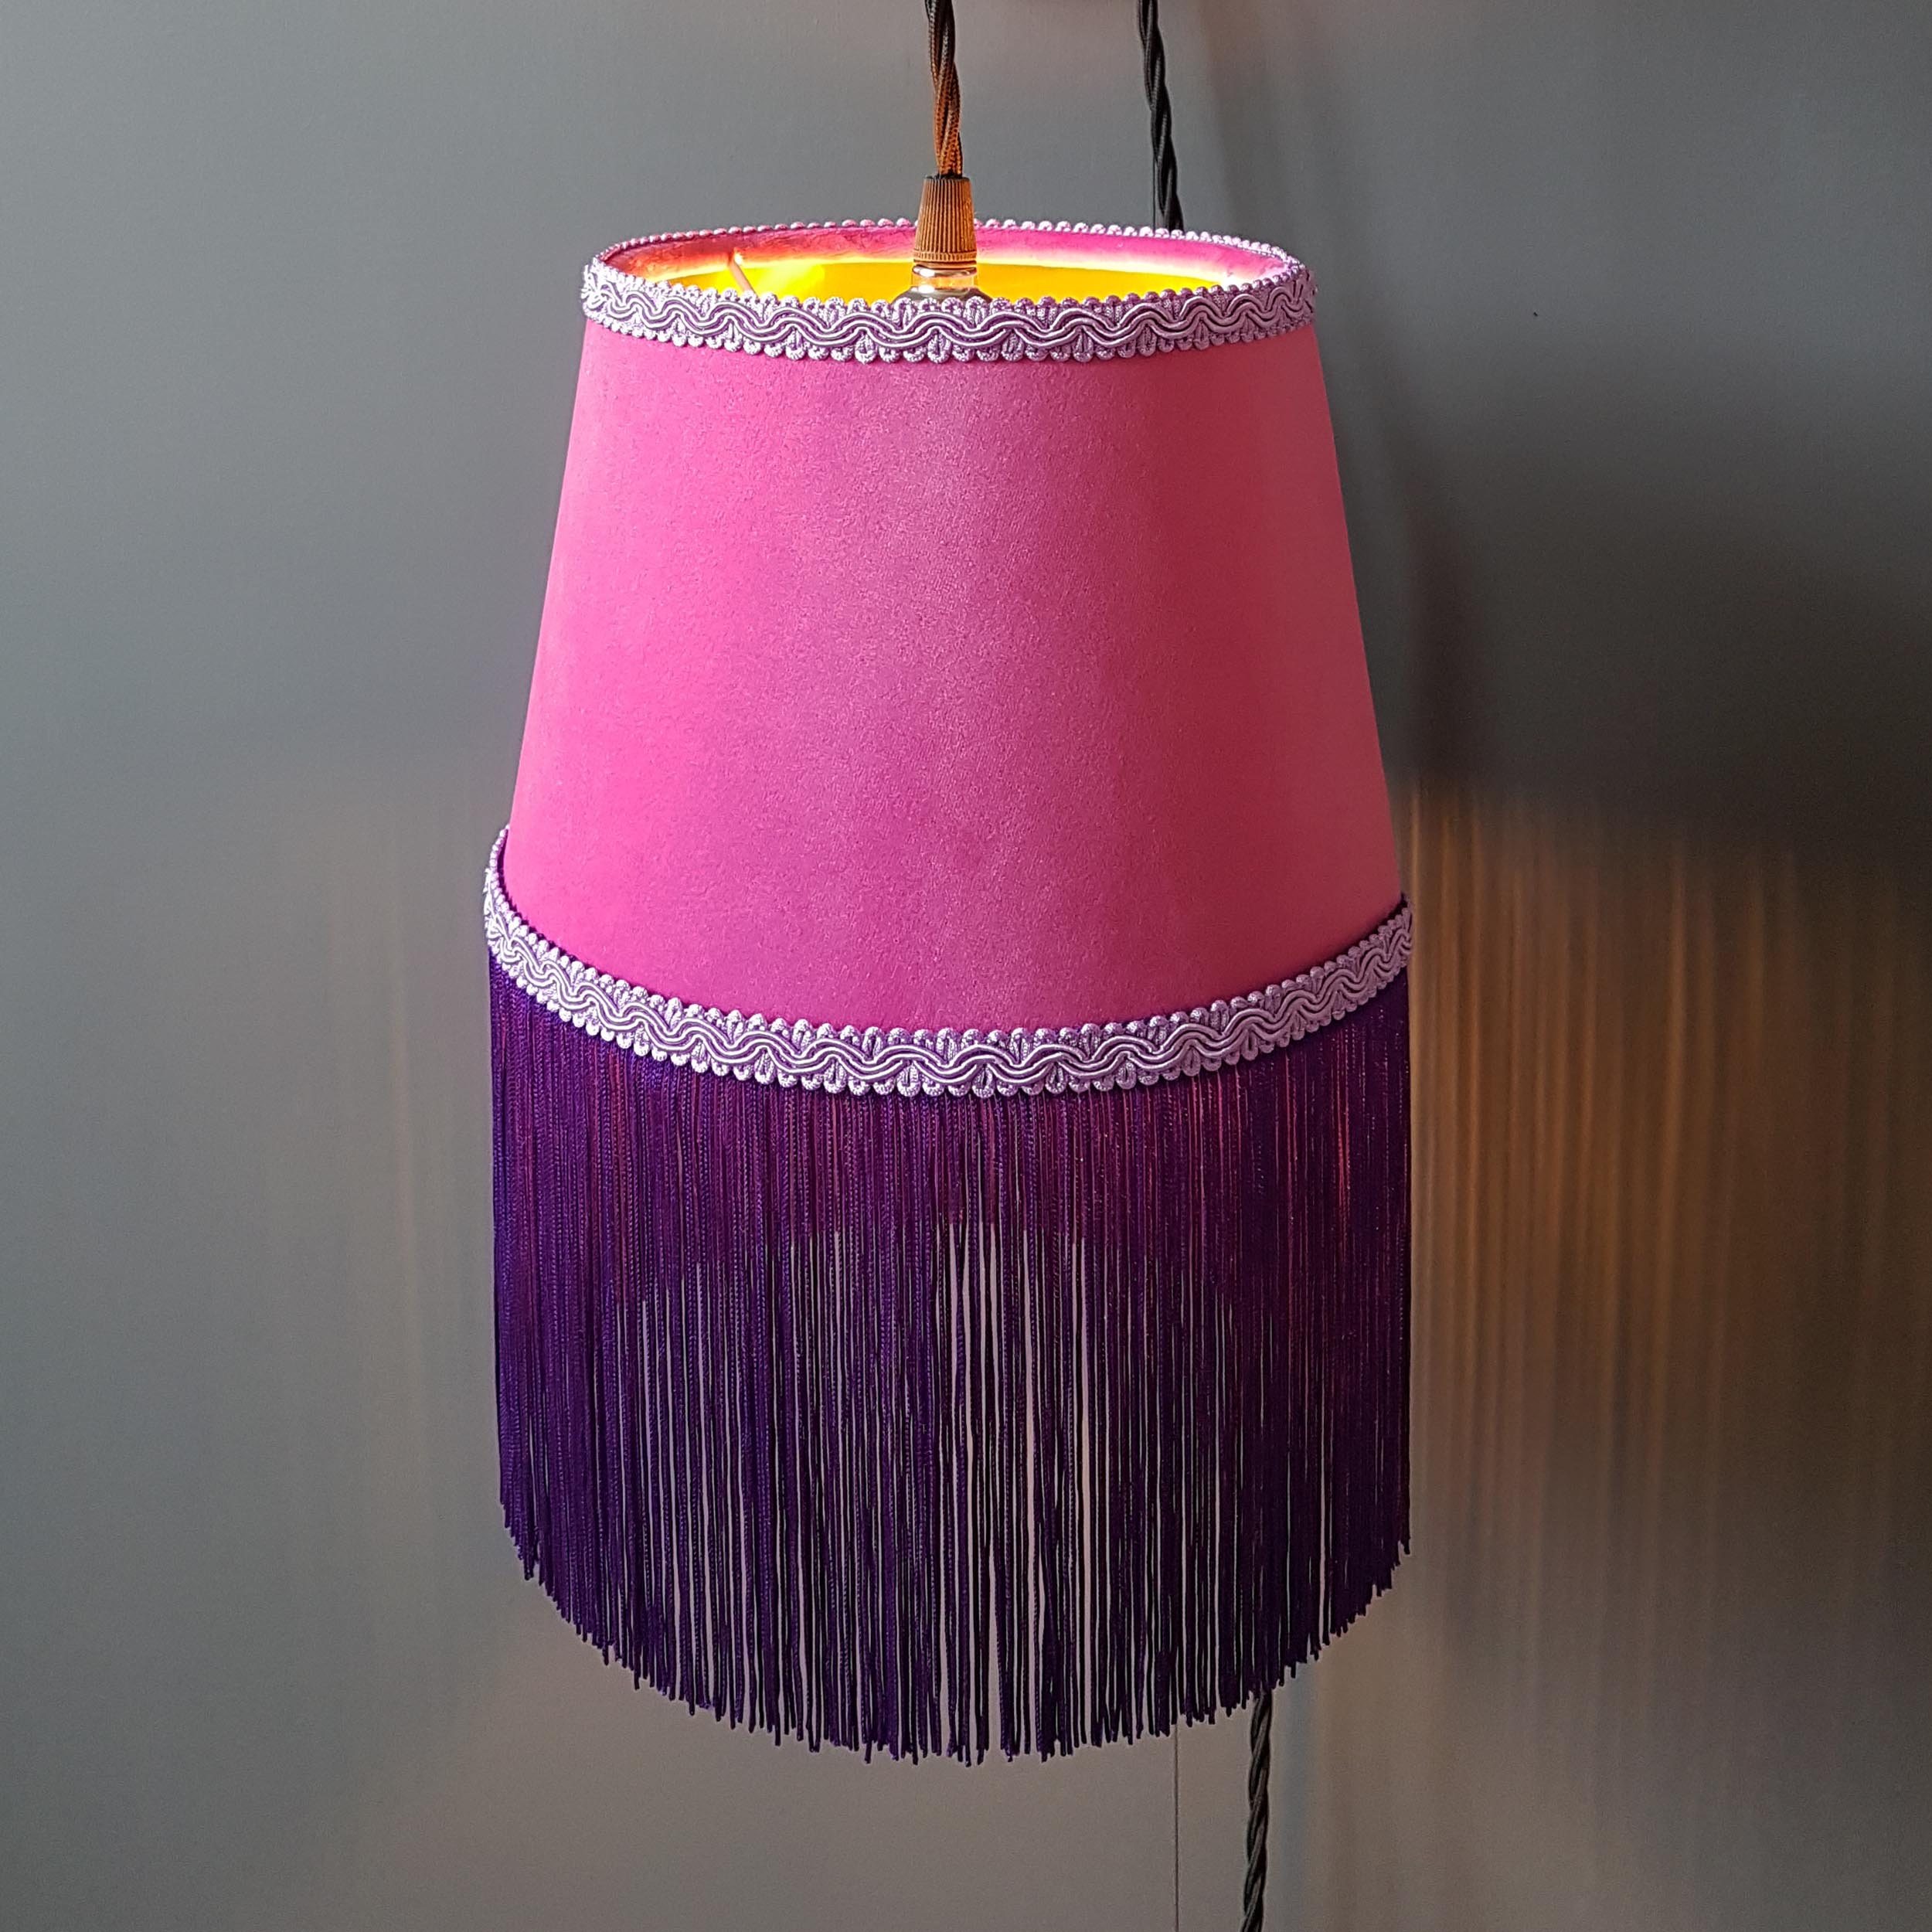 Luxury pink velvet lampshade with purple fringe and copper lining